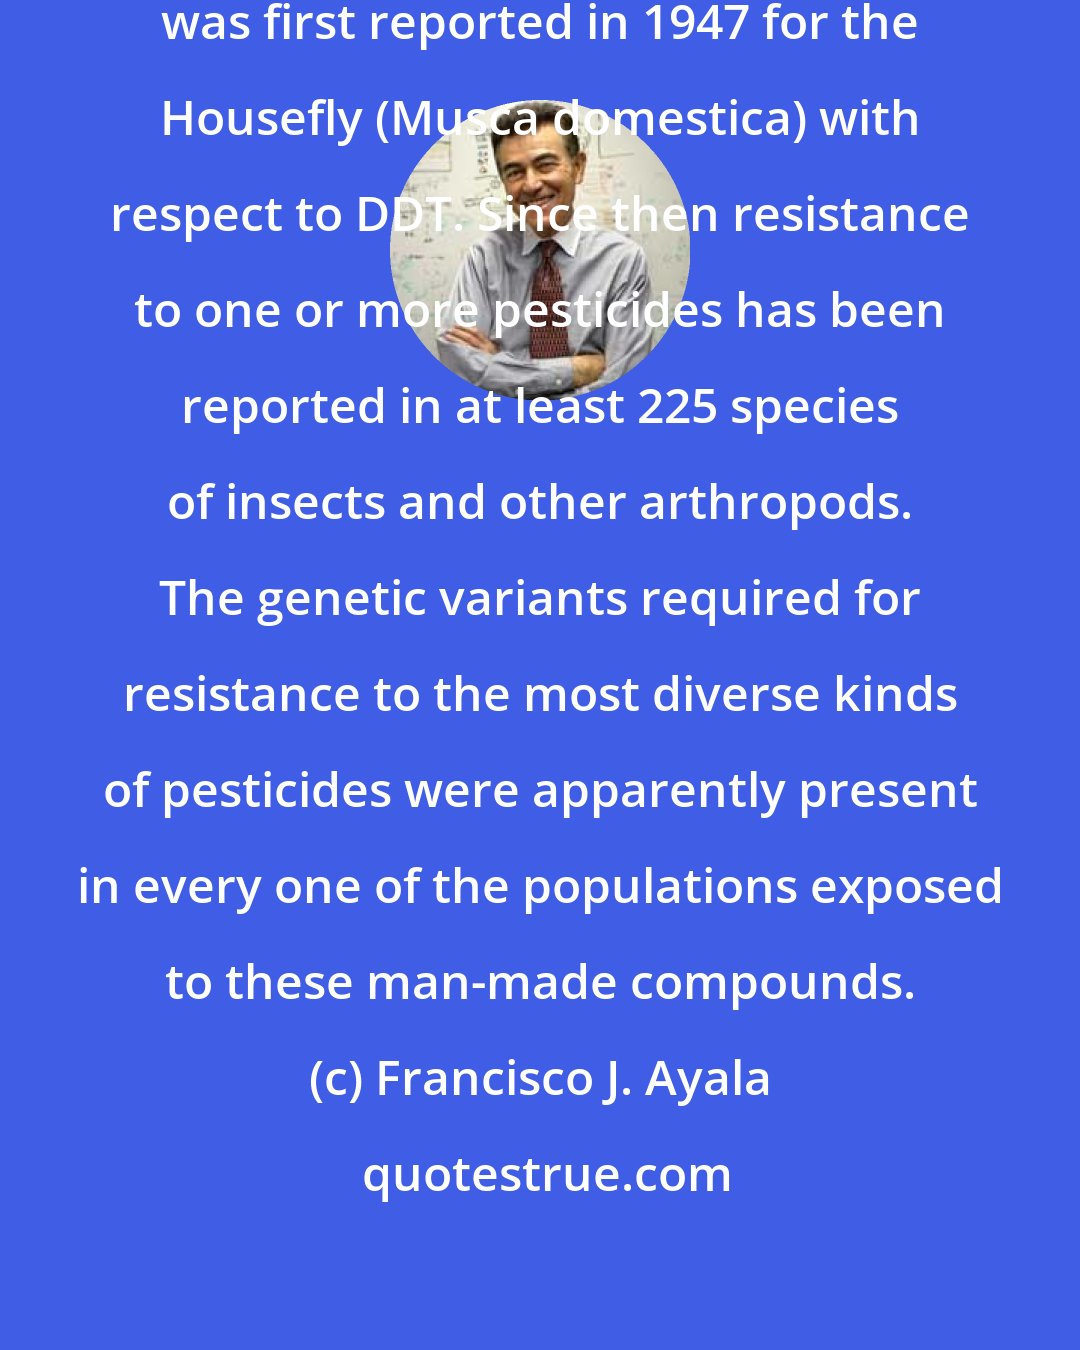 Francisco J. Ayala: Insect resistance to a pesticide was first reported in 1947 for the Housefly (Musca domestica) with respect to DDT. Since then resistance to one or more pesticides has been reported in at least 225 species of insects and other arthropods. The genetic variants required for resistance to the most diverse kinds of pesticides were apparently present in every one of the populations exposed to these man-made compounds.